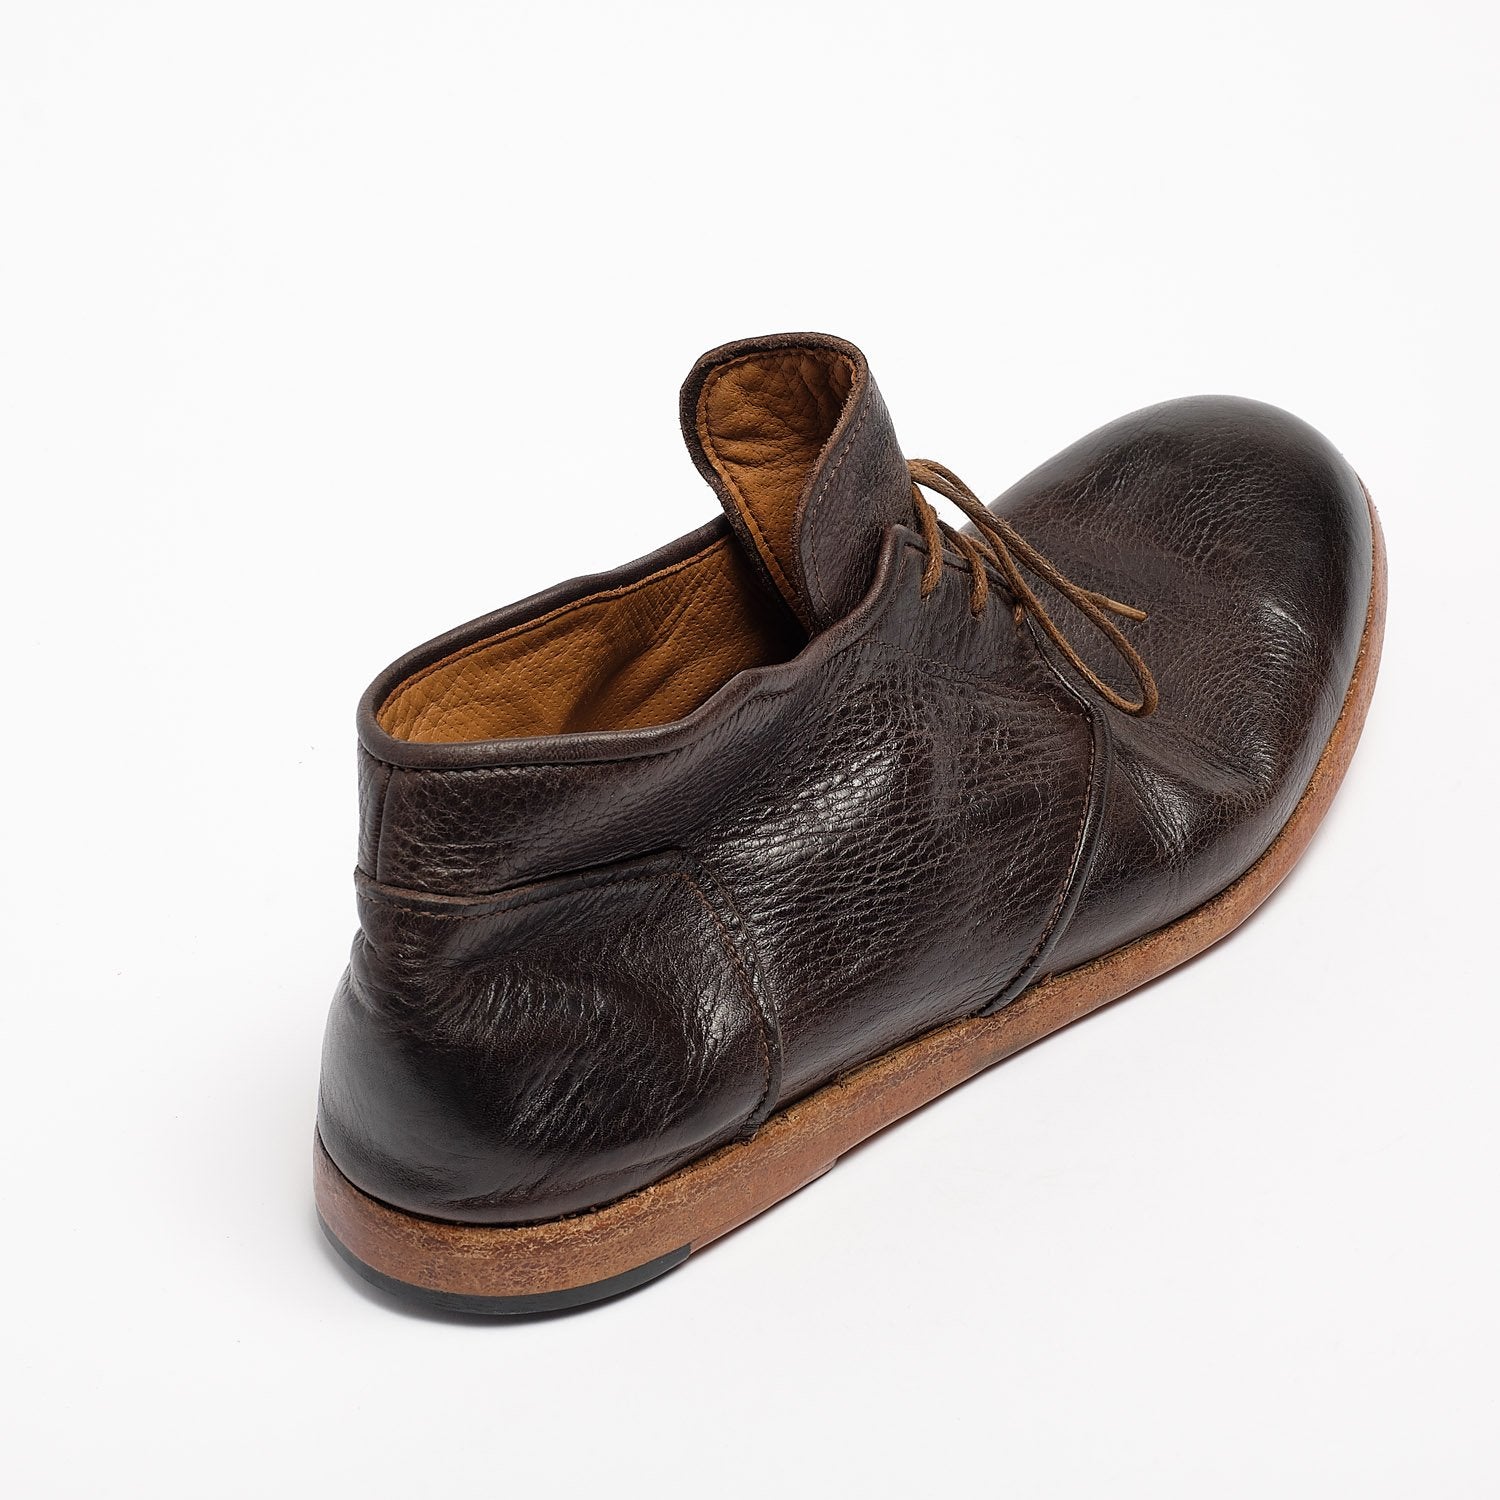 Haig Laced Mid Shoes natural soft leather dark_Brown